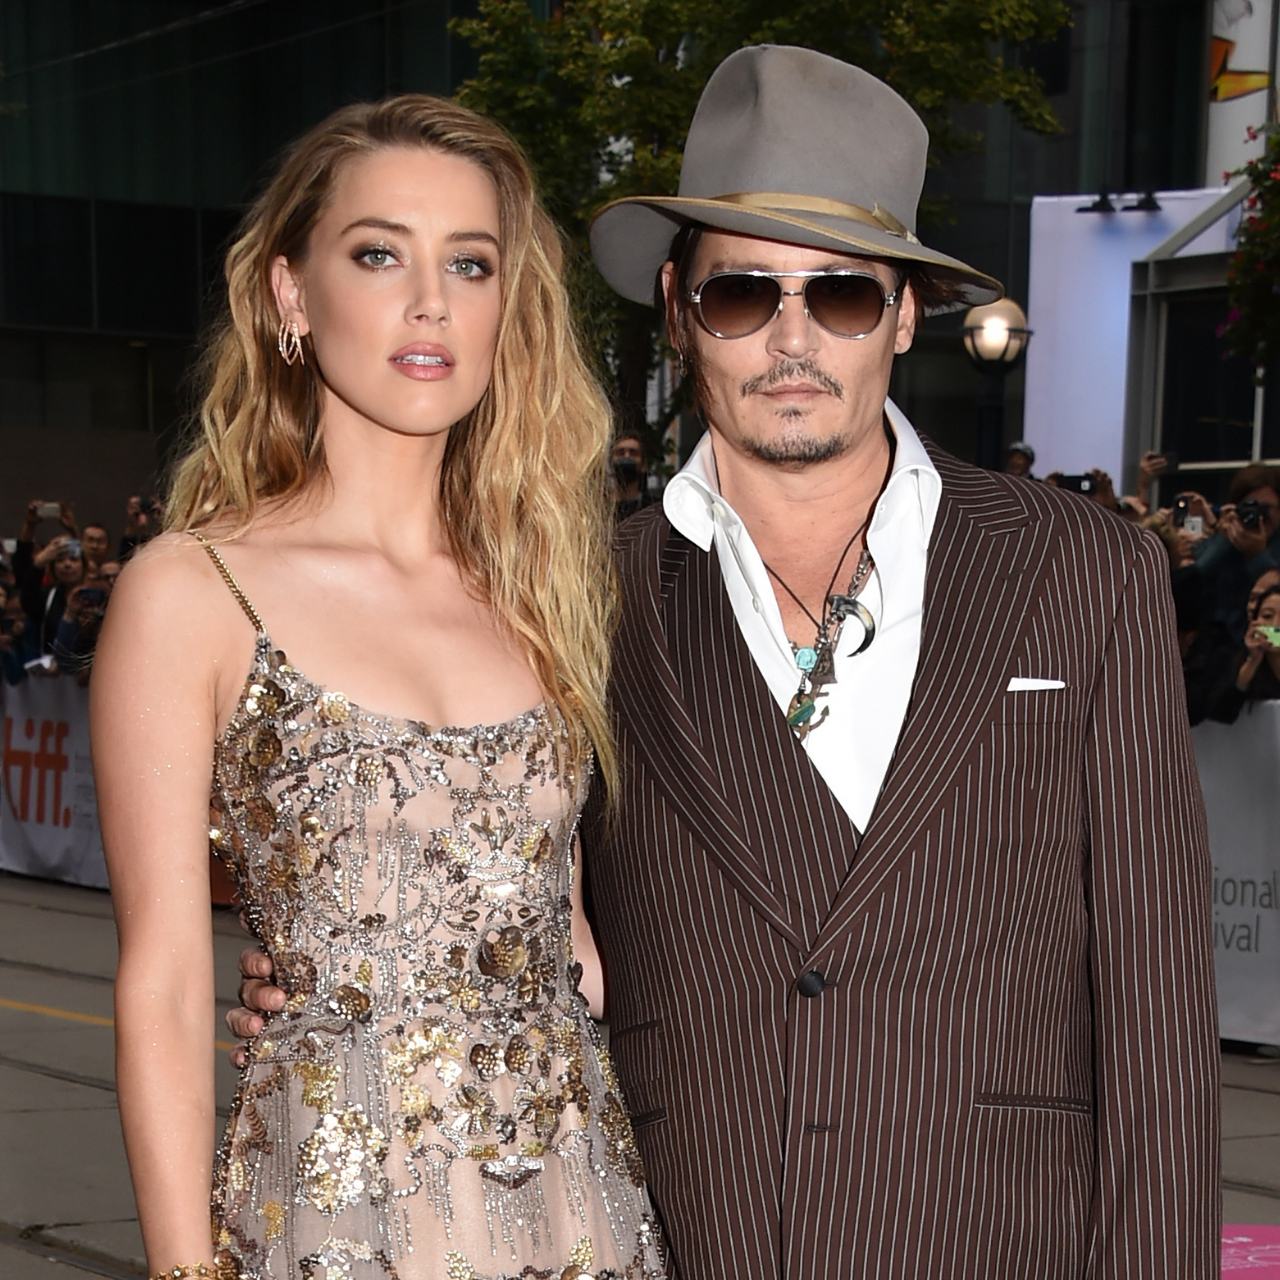 Amber Heard and Johnny Depp at the Toronto premiere of The Danish Girl 2015